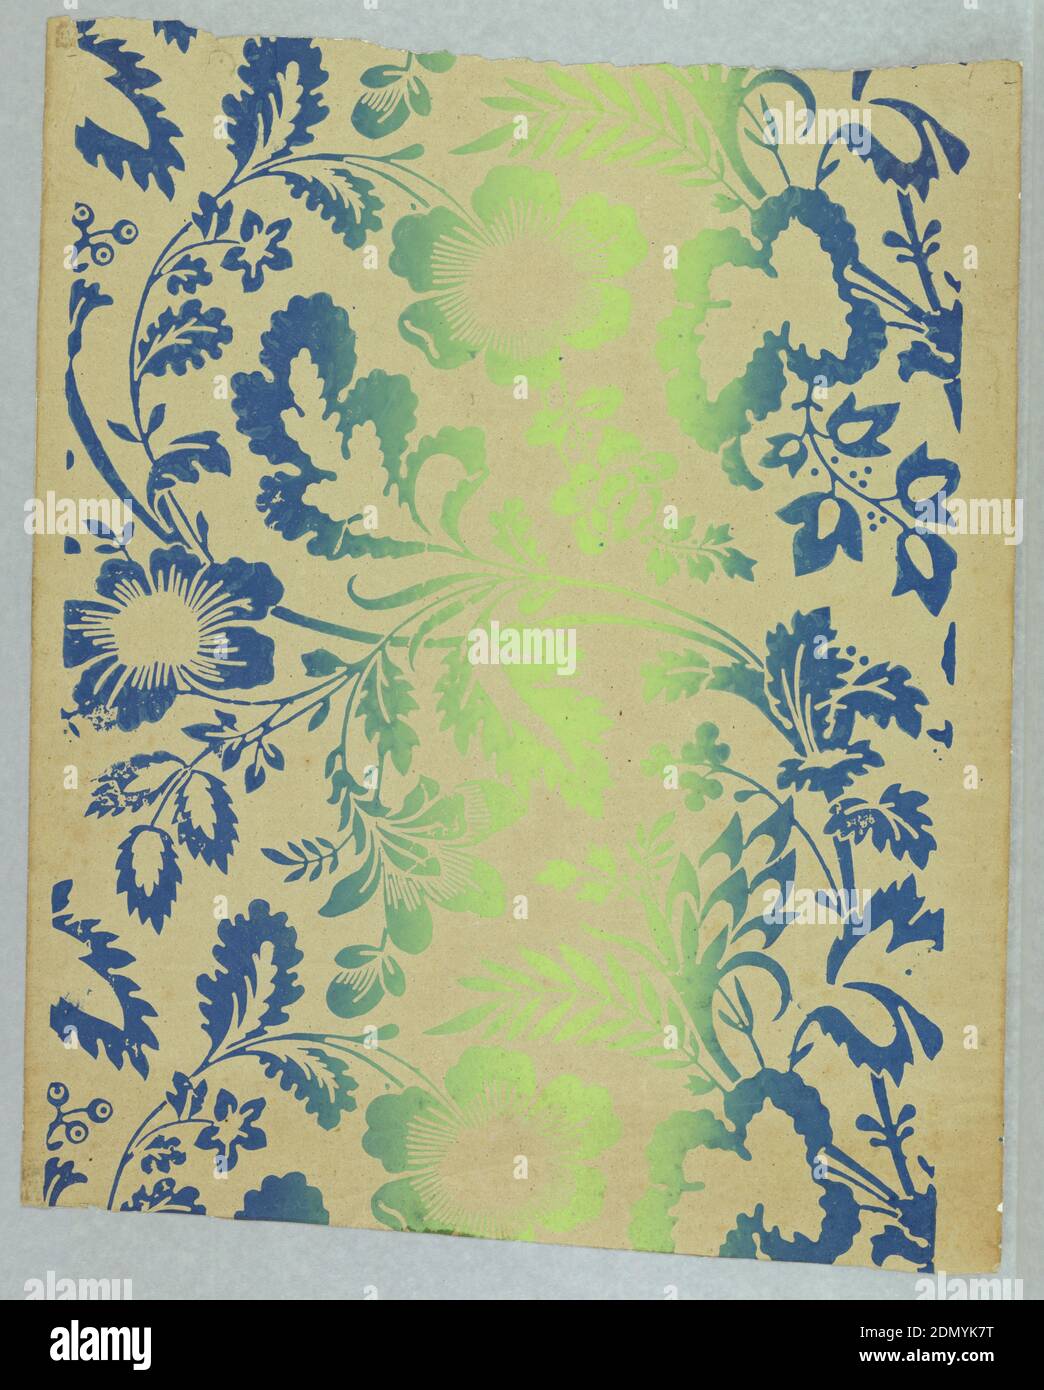 Sidewall, Block-printed, Irise or rainbow paper. Full width of paper giving repeat of large-scale arabesque of flowers and foliage in graded color, ranging from blue along edges to green down center., possibly USA, ca. 1830, Wallcoverings, Sidewall Stock Photo